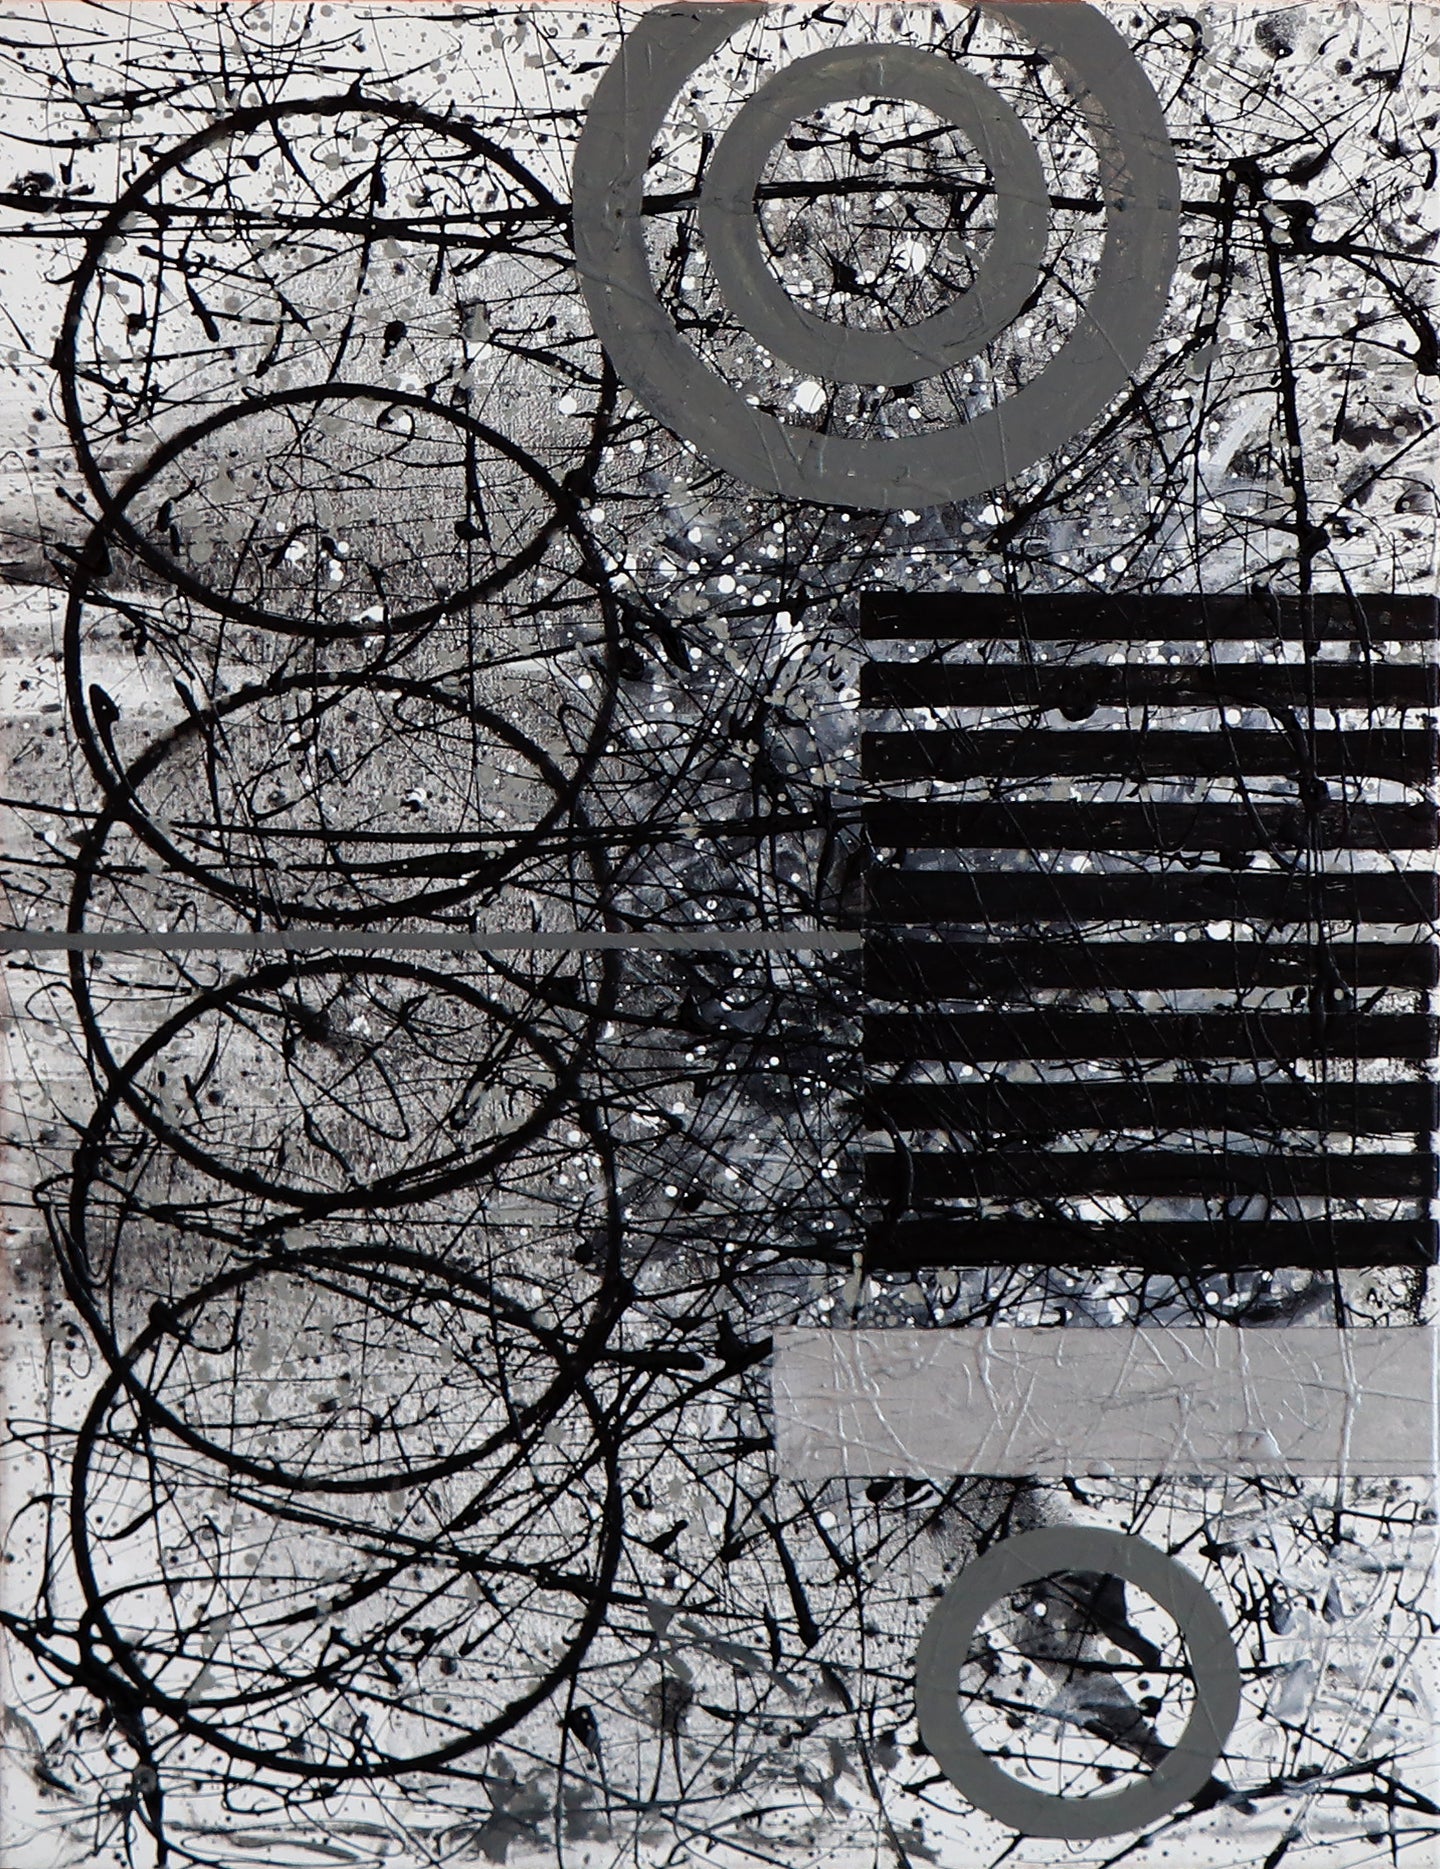 J. Steven Manolis,  Black & White Universe, 2020 40 x 30 inches Acrylic on Canvas  J. Steven Manolis started focusing on painting Black & White abstract paintings as a category when art critic Donald Kuspit said to him, 